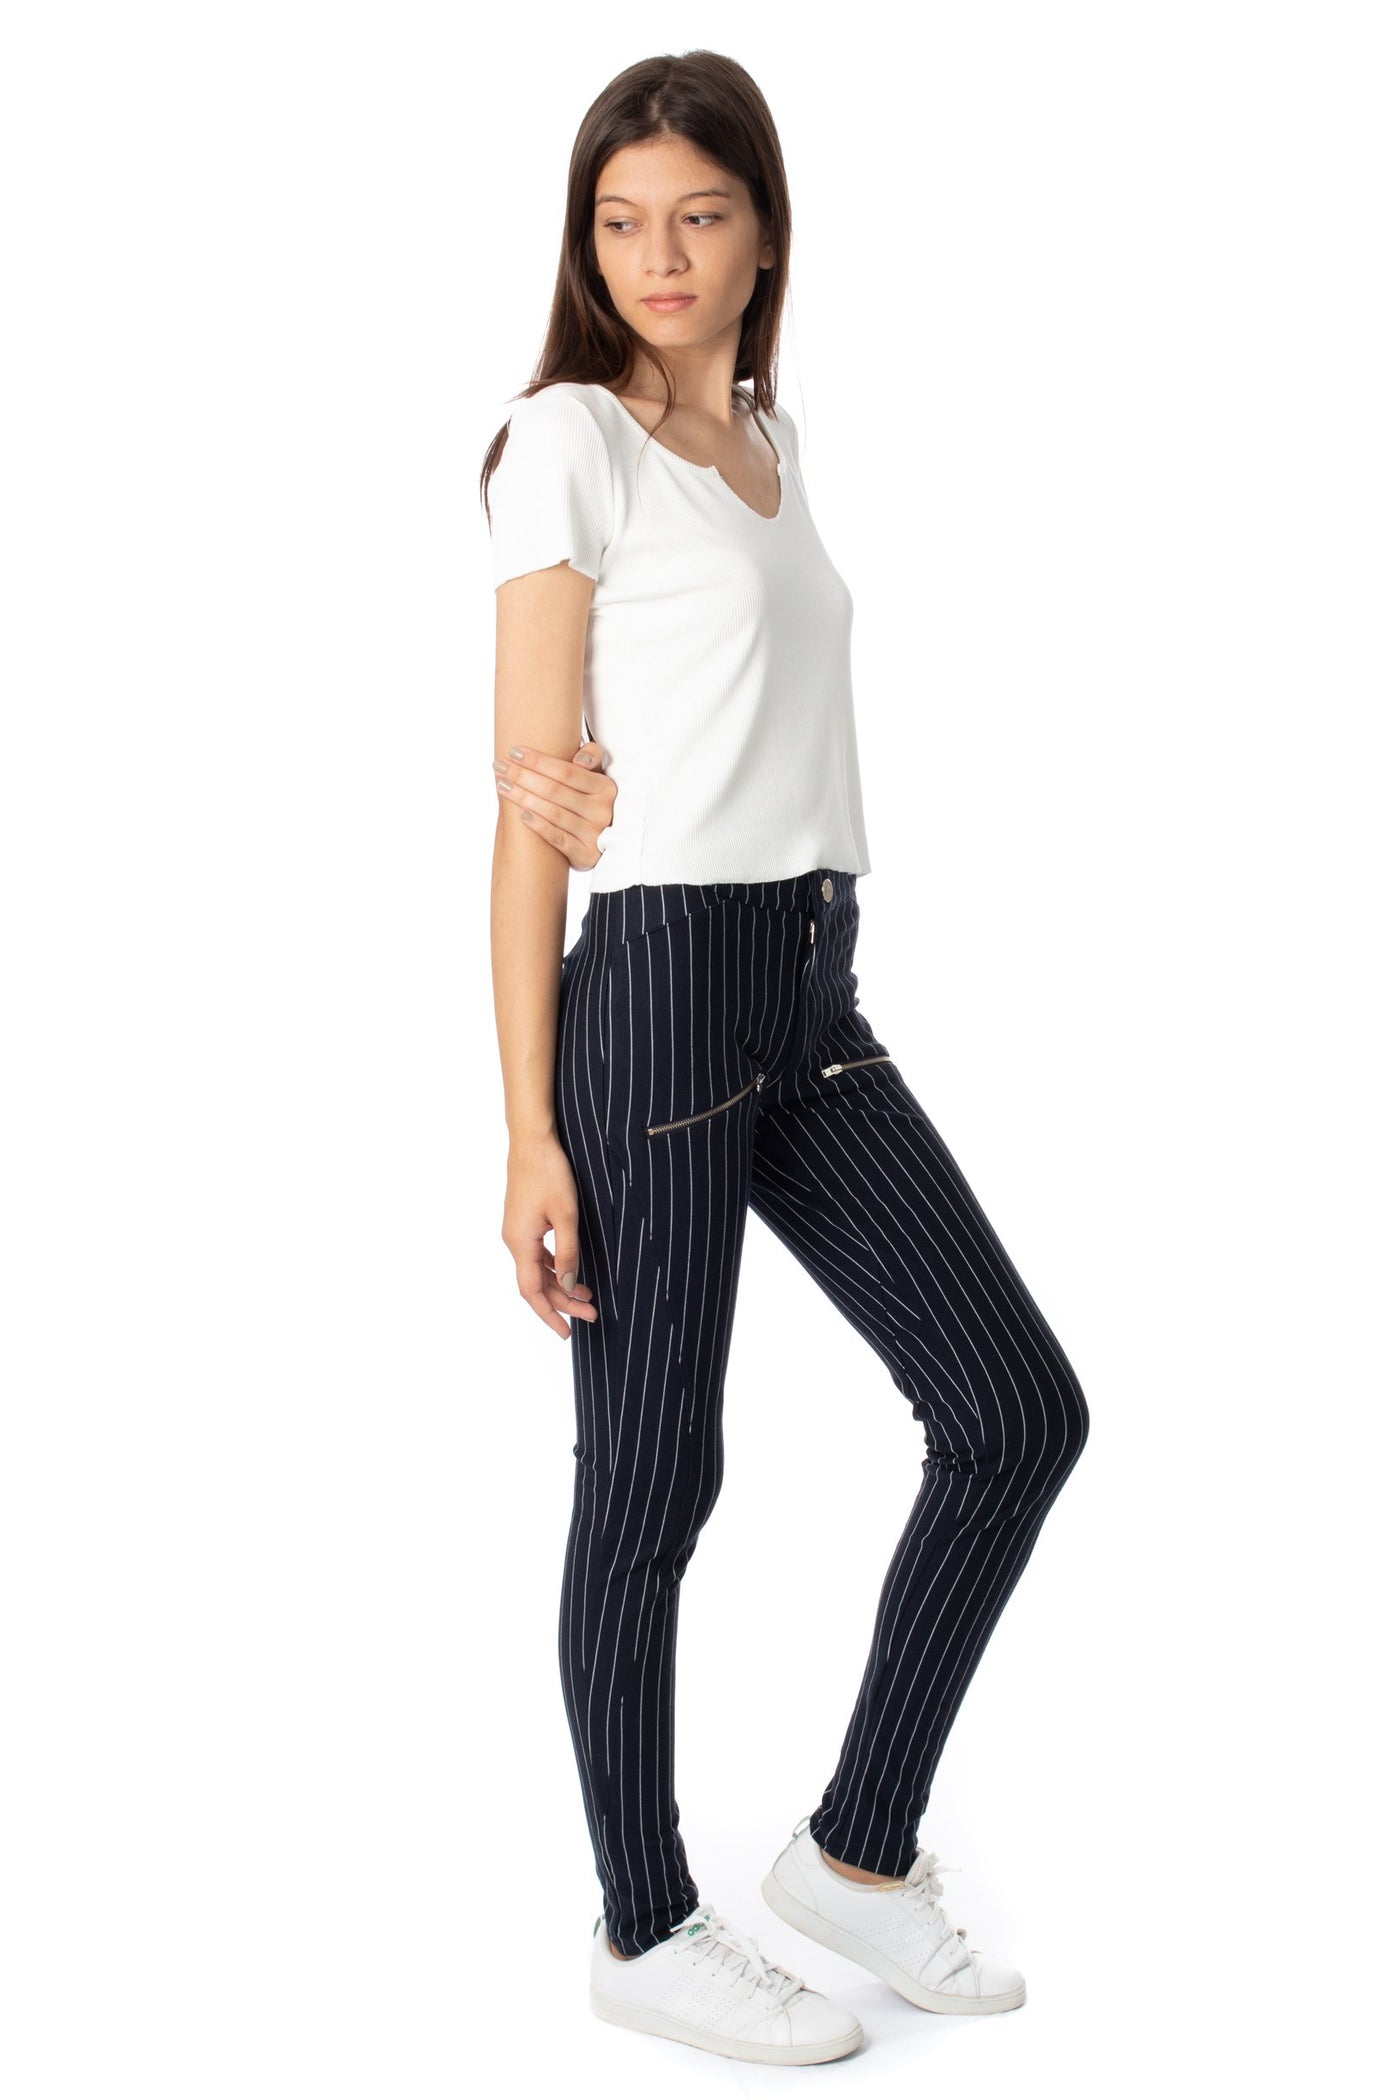 chassca pant with stripes - Breakmood